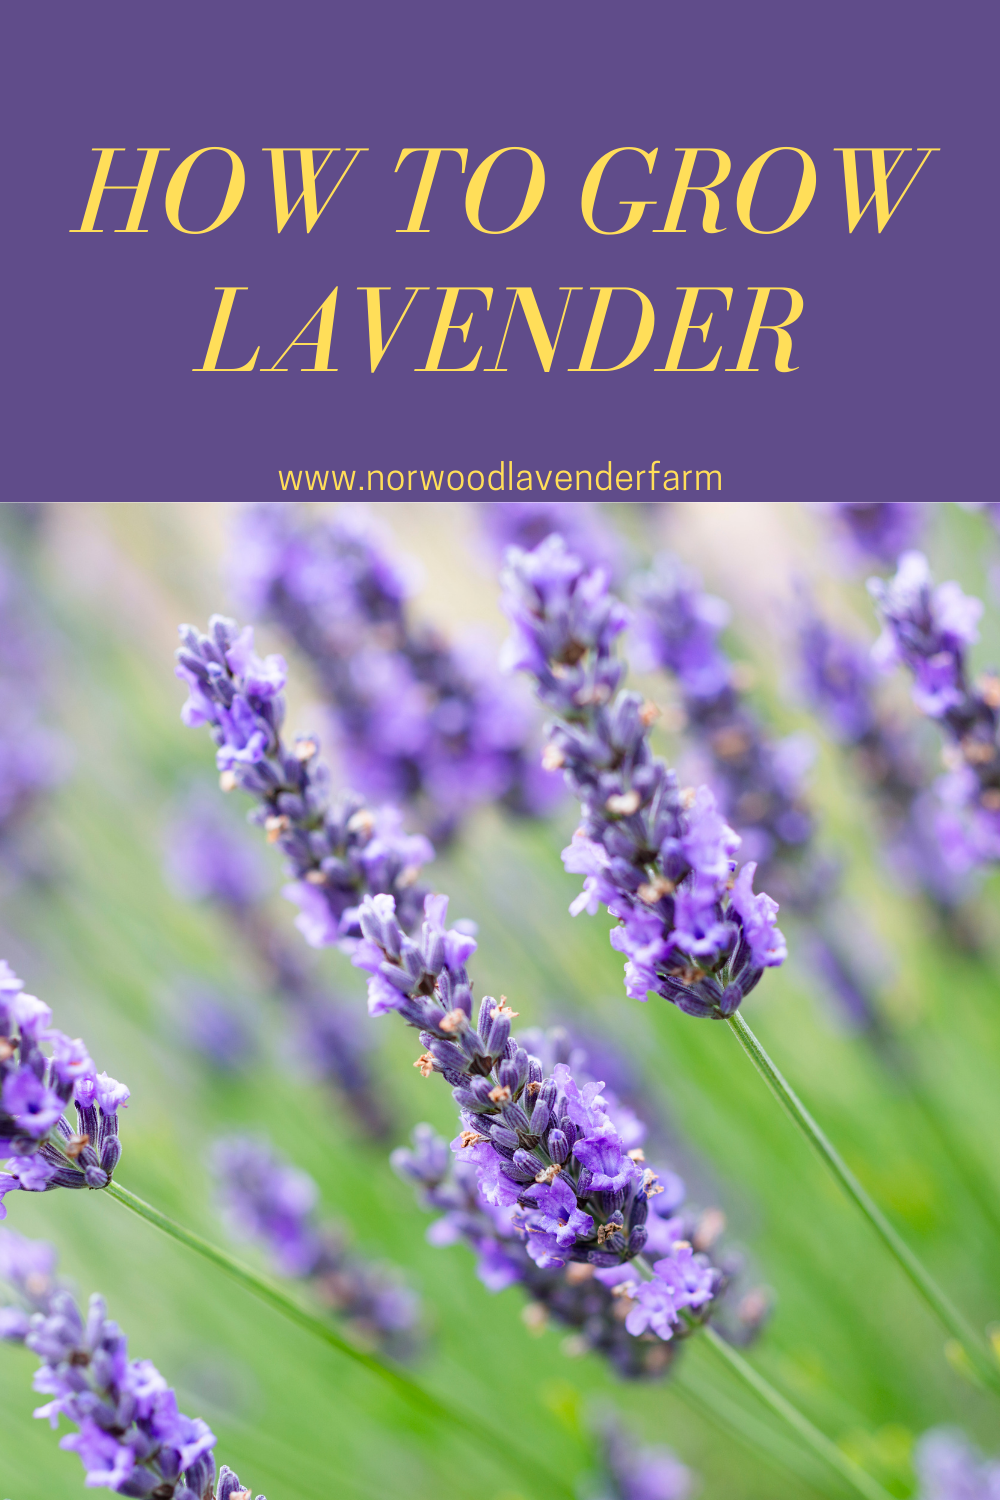 How to Grow Lavender in Your Backyard Garden